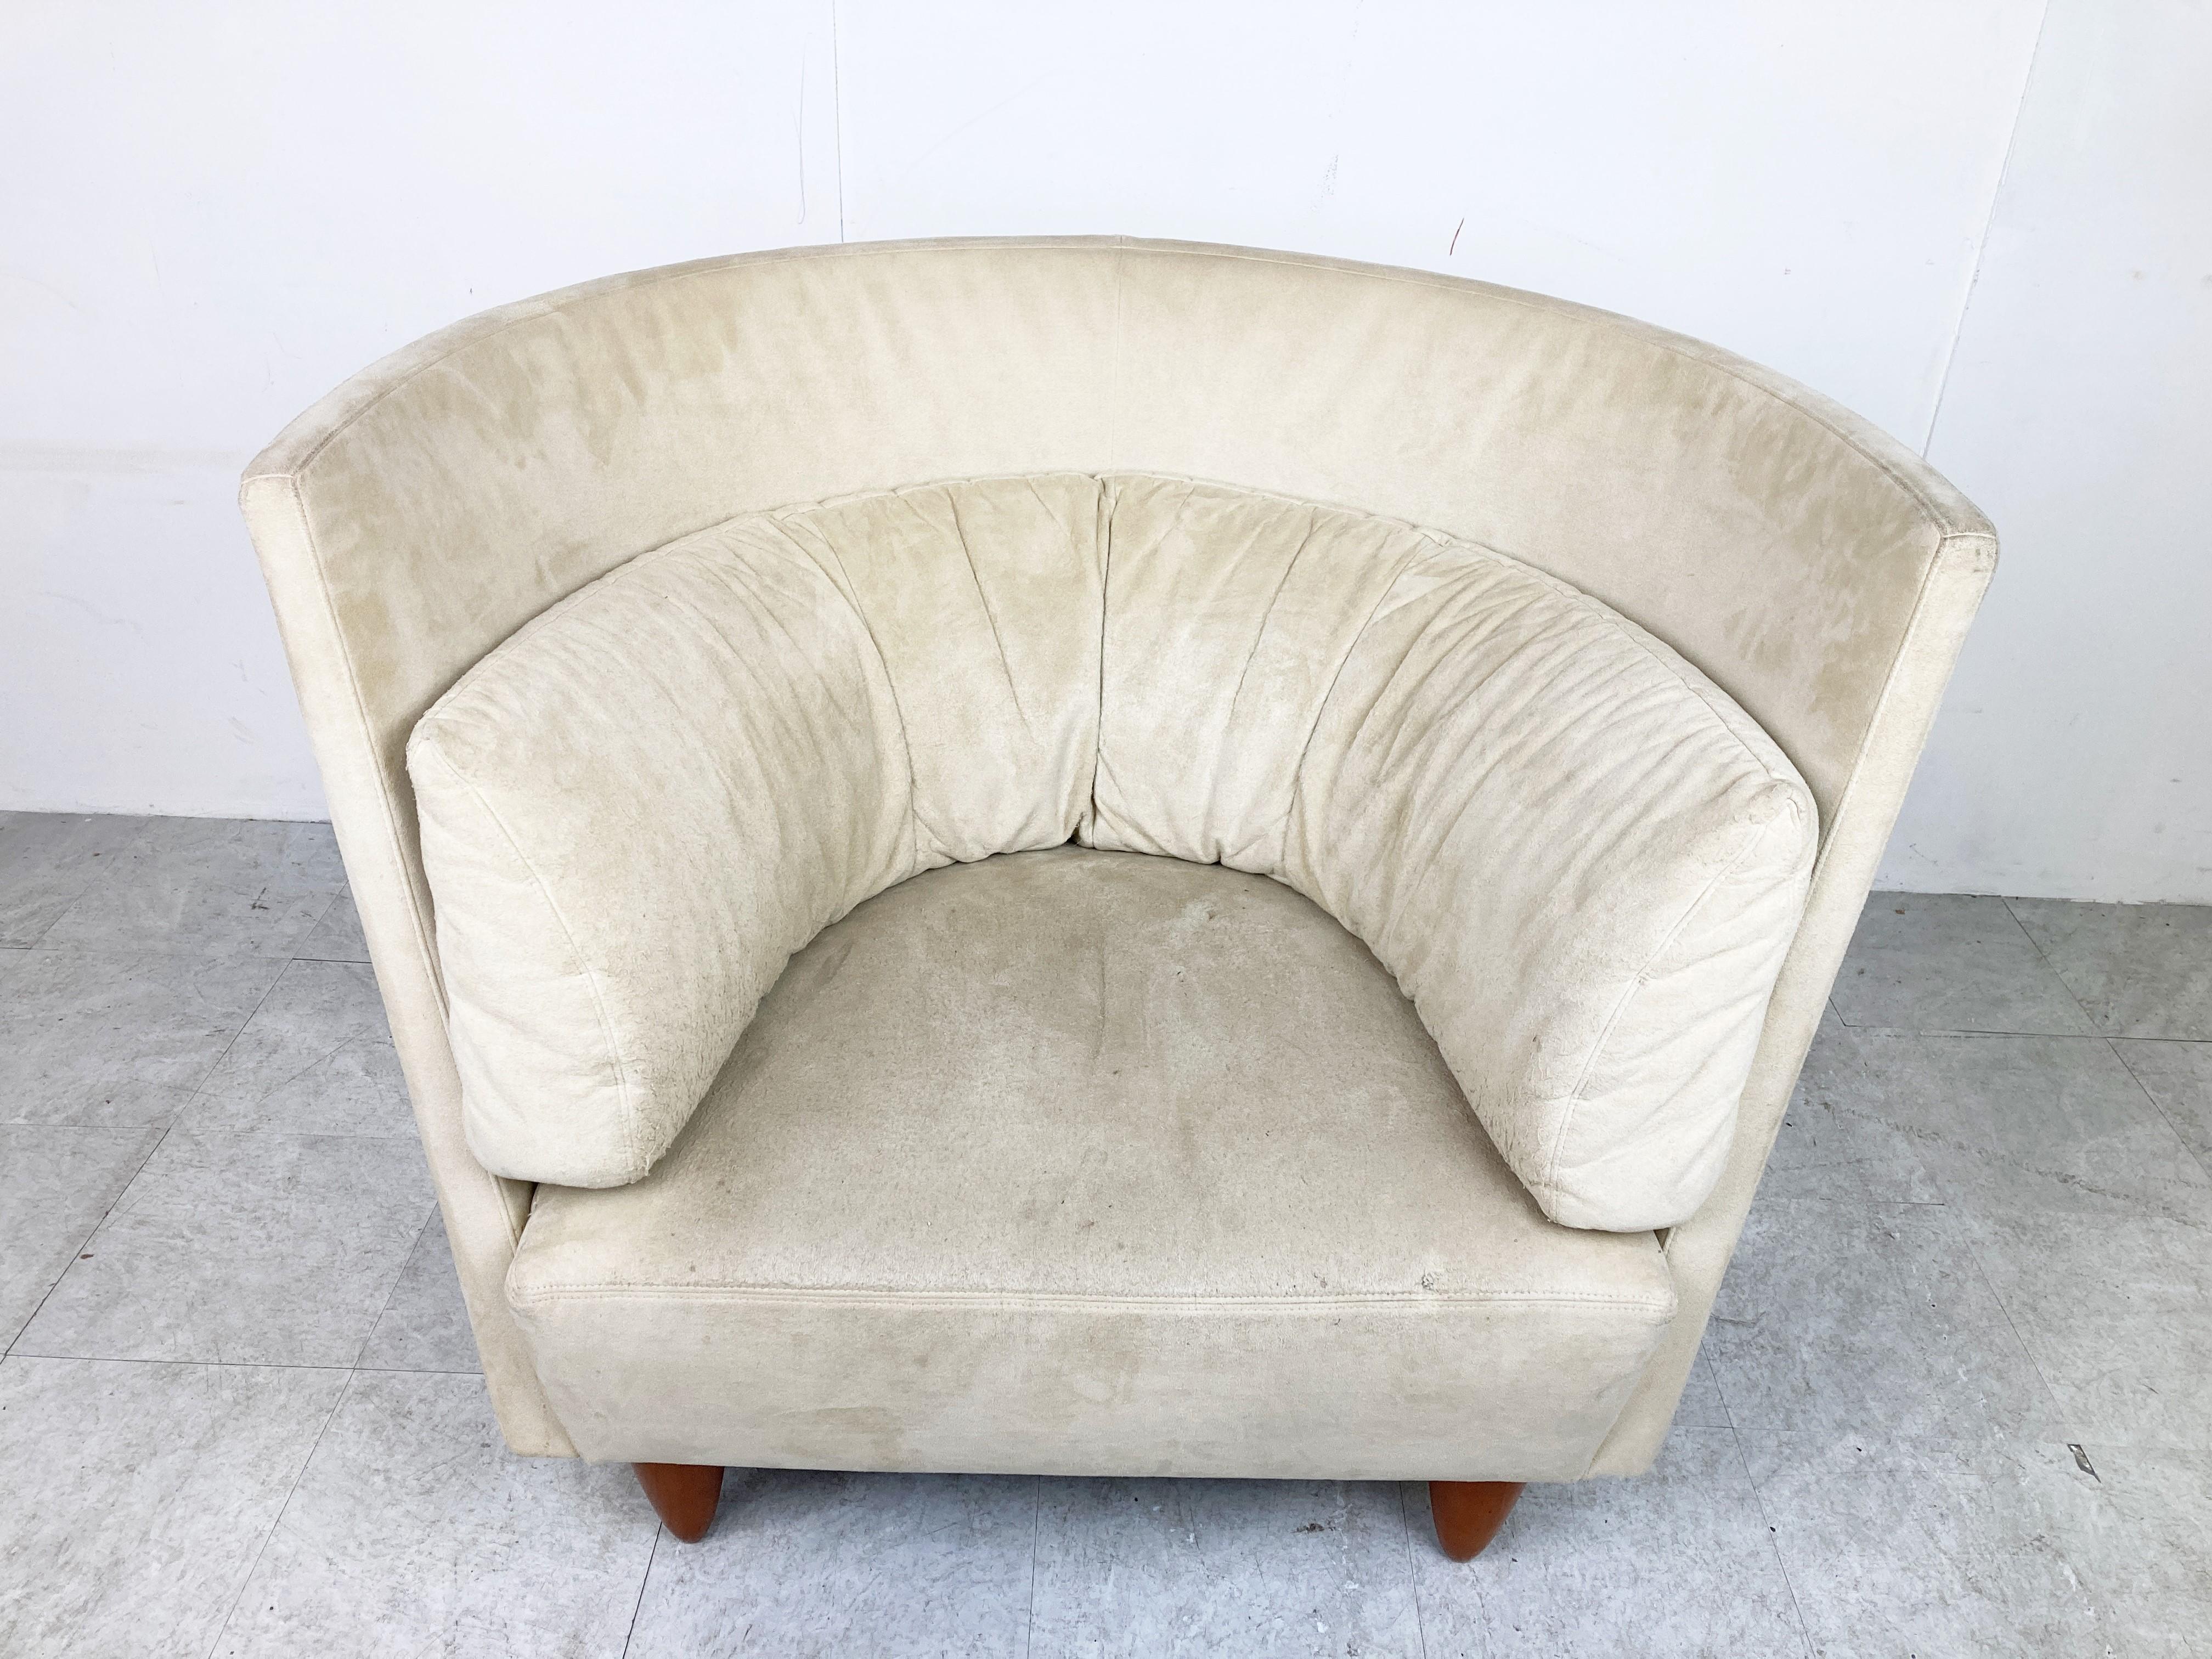 Rare curved highback lounge chair by Ligne Roset.

Nicely designed lounge chair in suede upholstery in a beige/white colour.

Comfortable and very decorative as well.

The chair has 4 conical wooden legs.

1990s - France.

Good condition